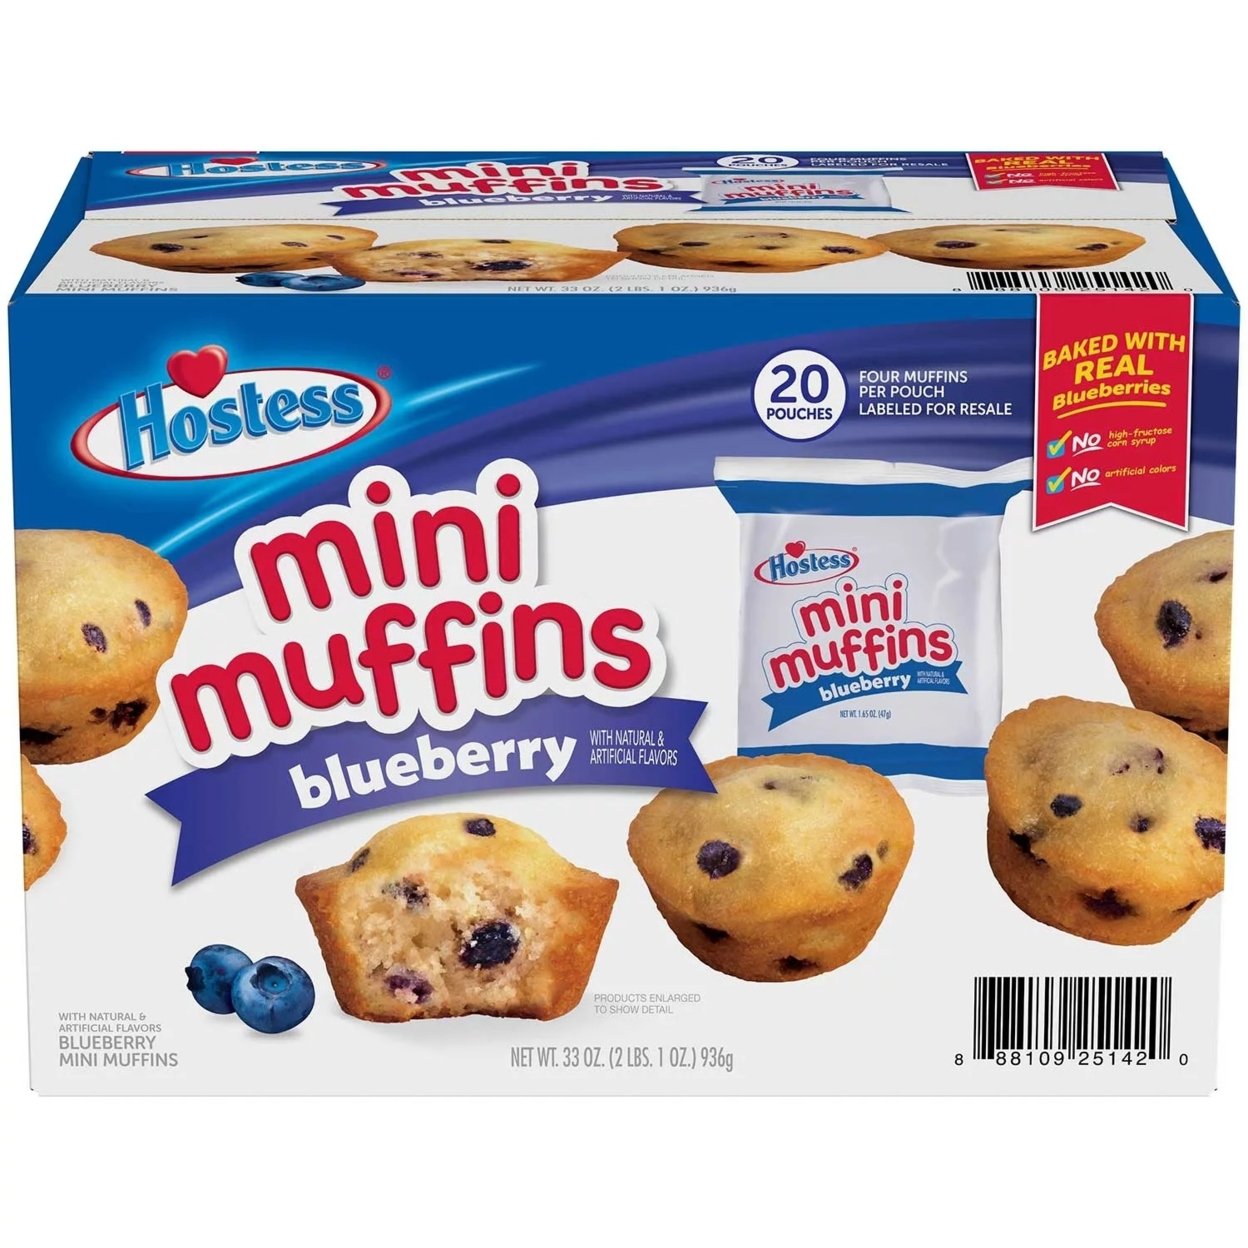 Hostess Blueberry Mini Muffins (20 Count)